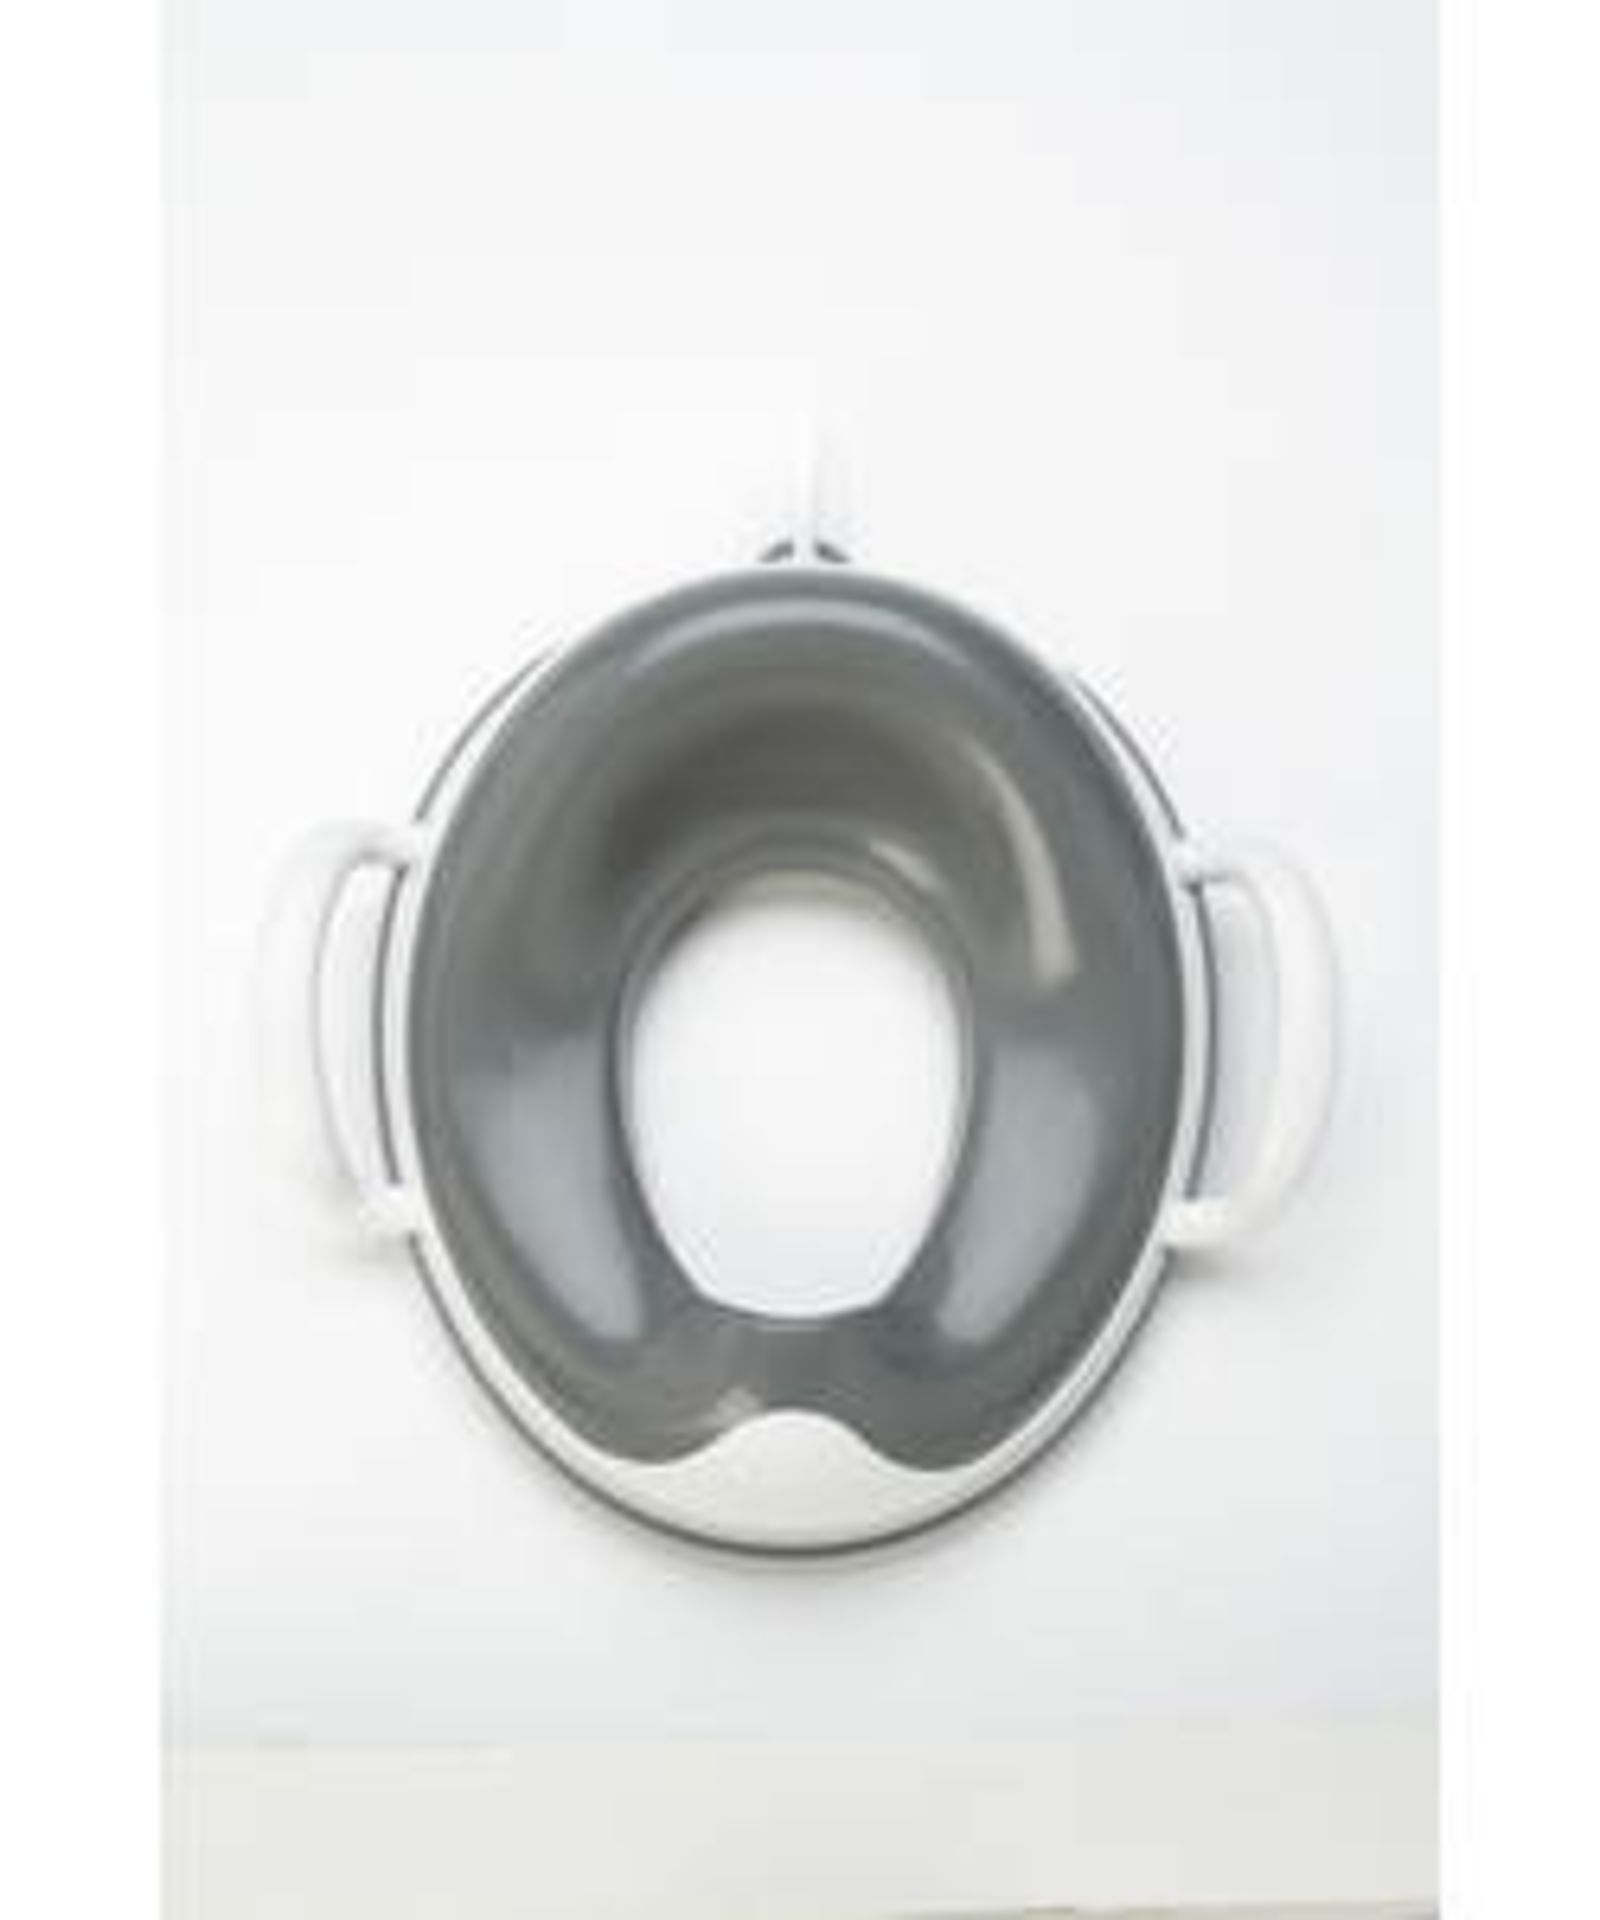 PRINCE LIONHEART WEE POD TOILET TRAINER (DELIVERY BAND A)